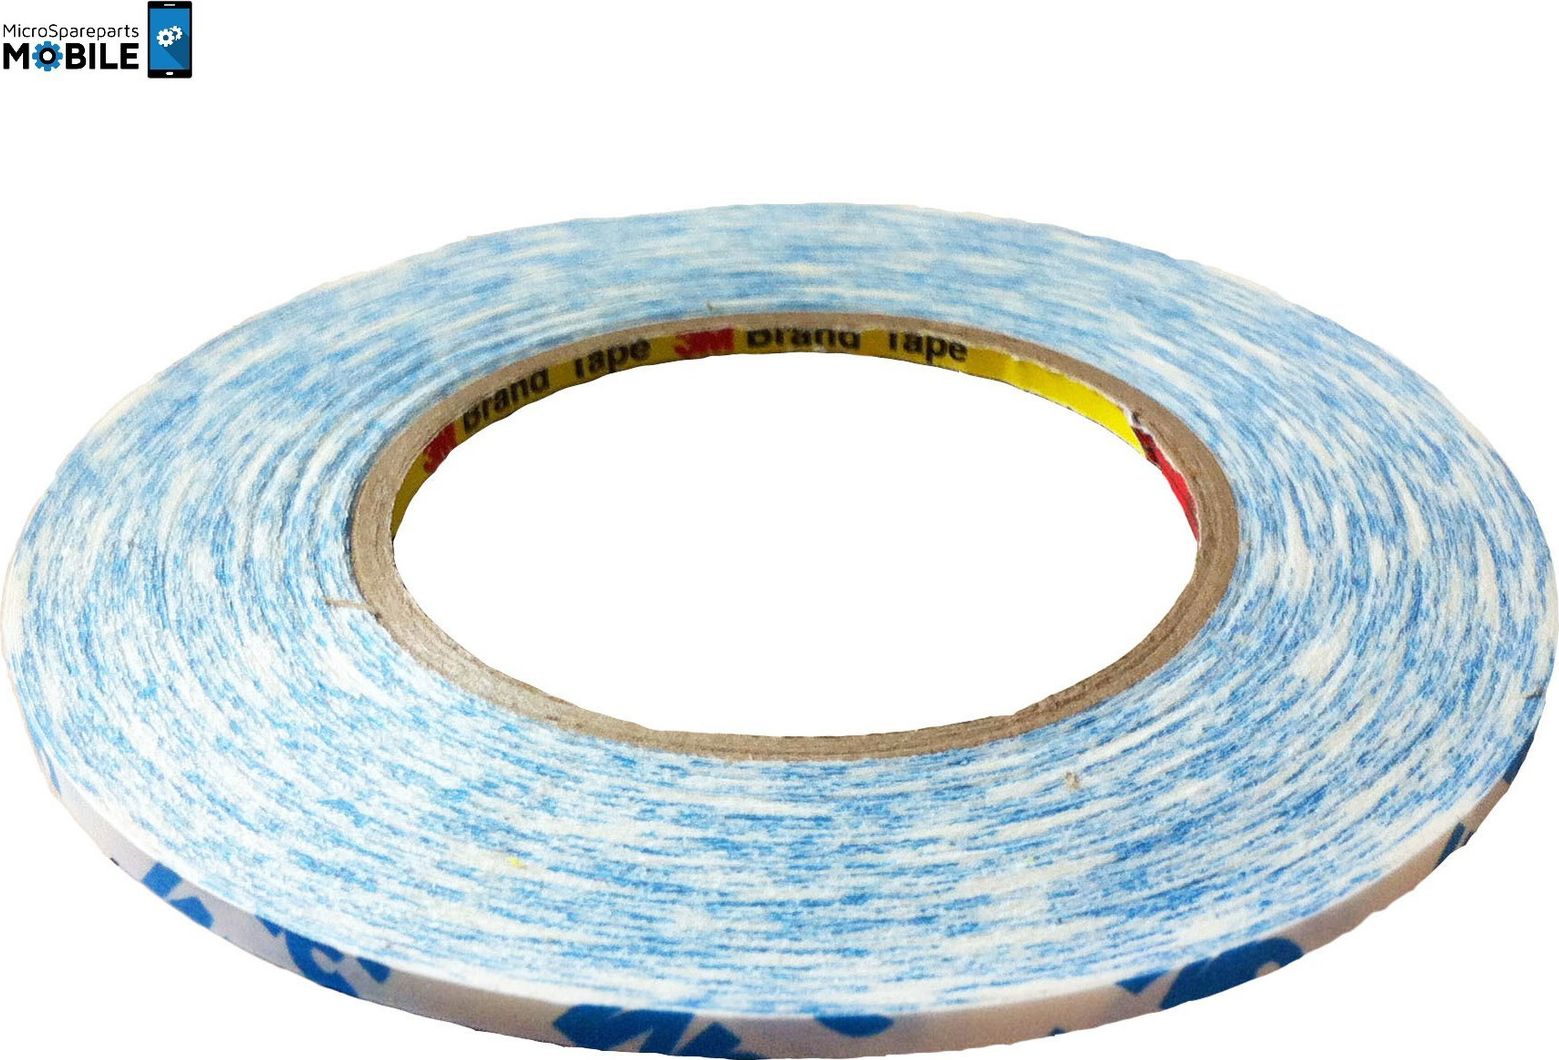 CoreParts Doublesided tape 4mm COREPARTS SPARES 4mm  - 50M - Tape Special for  ipad Darbarīki